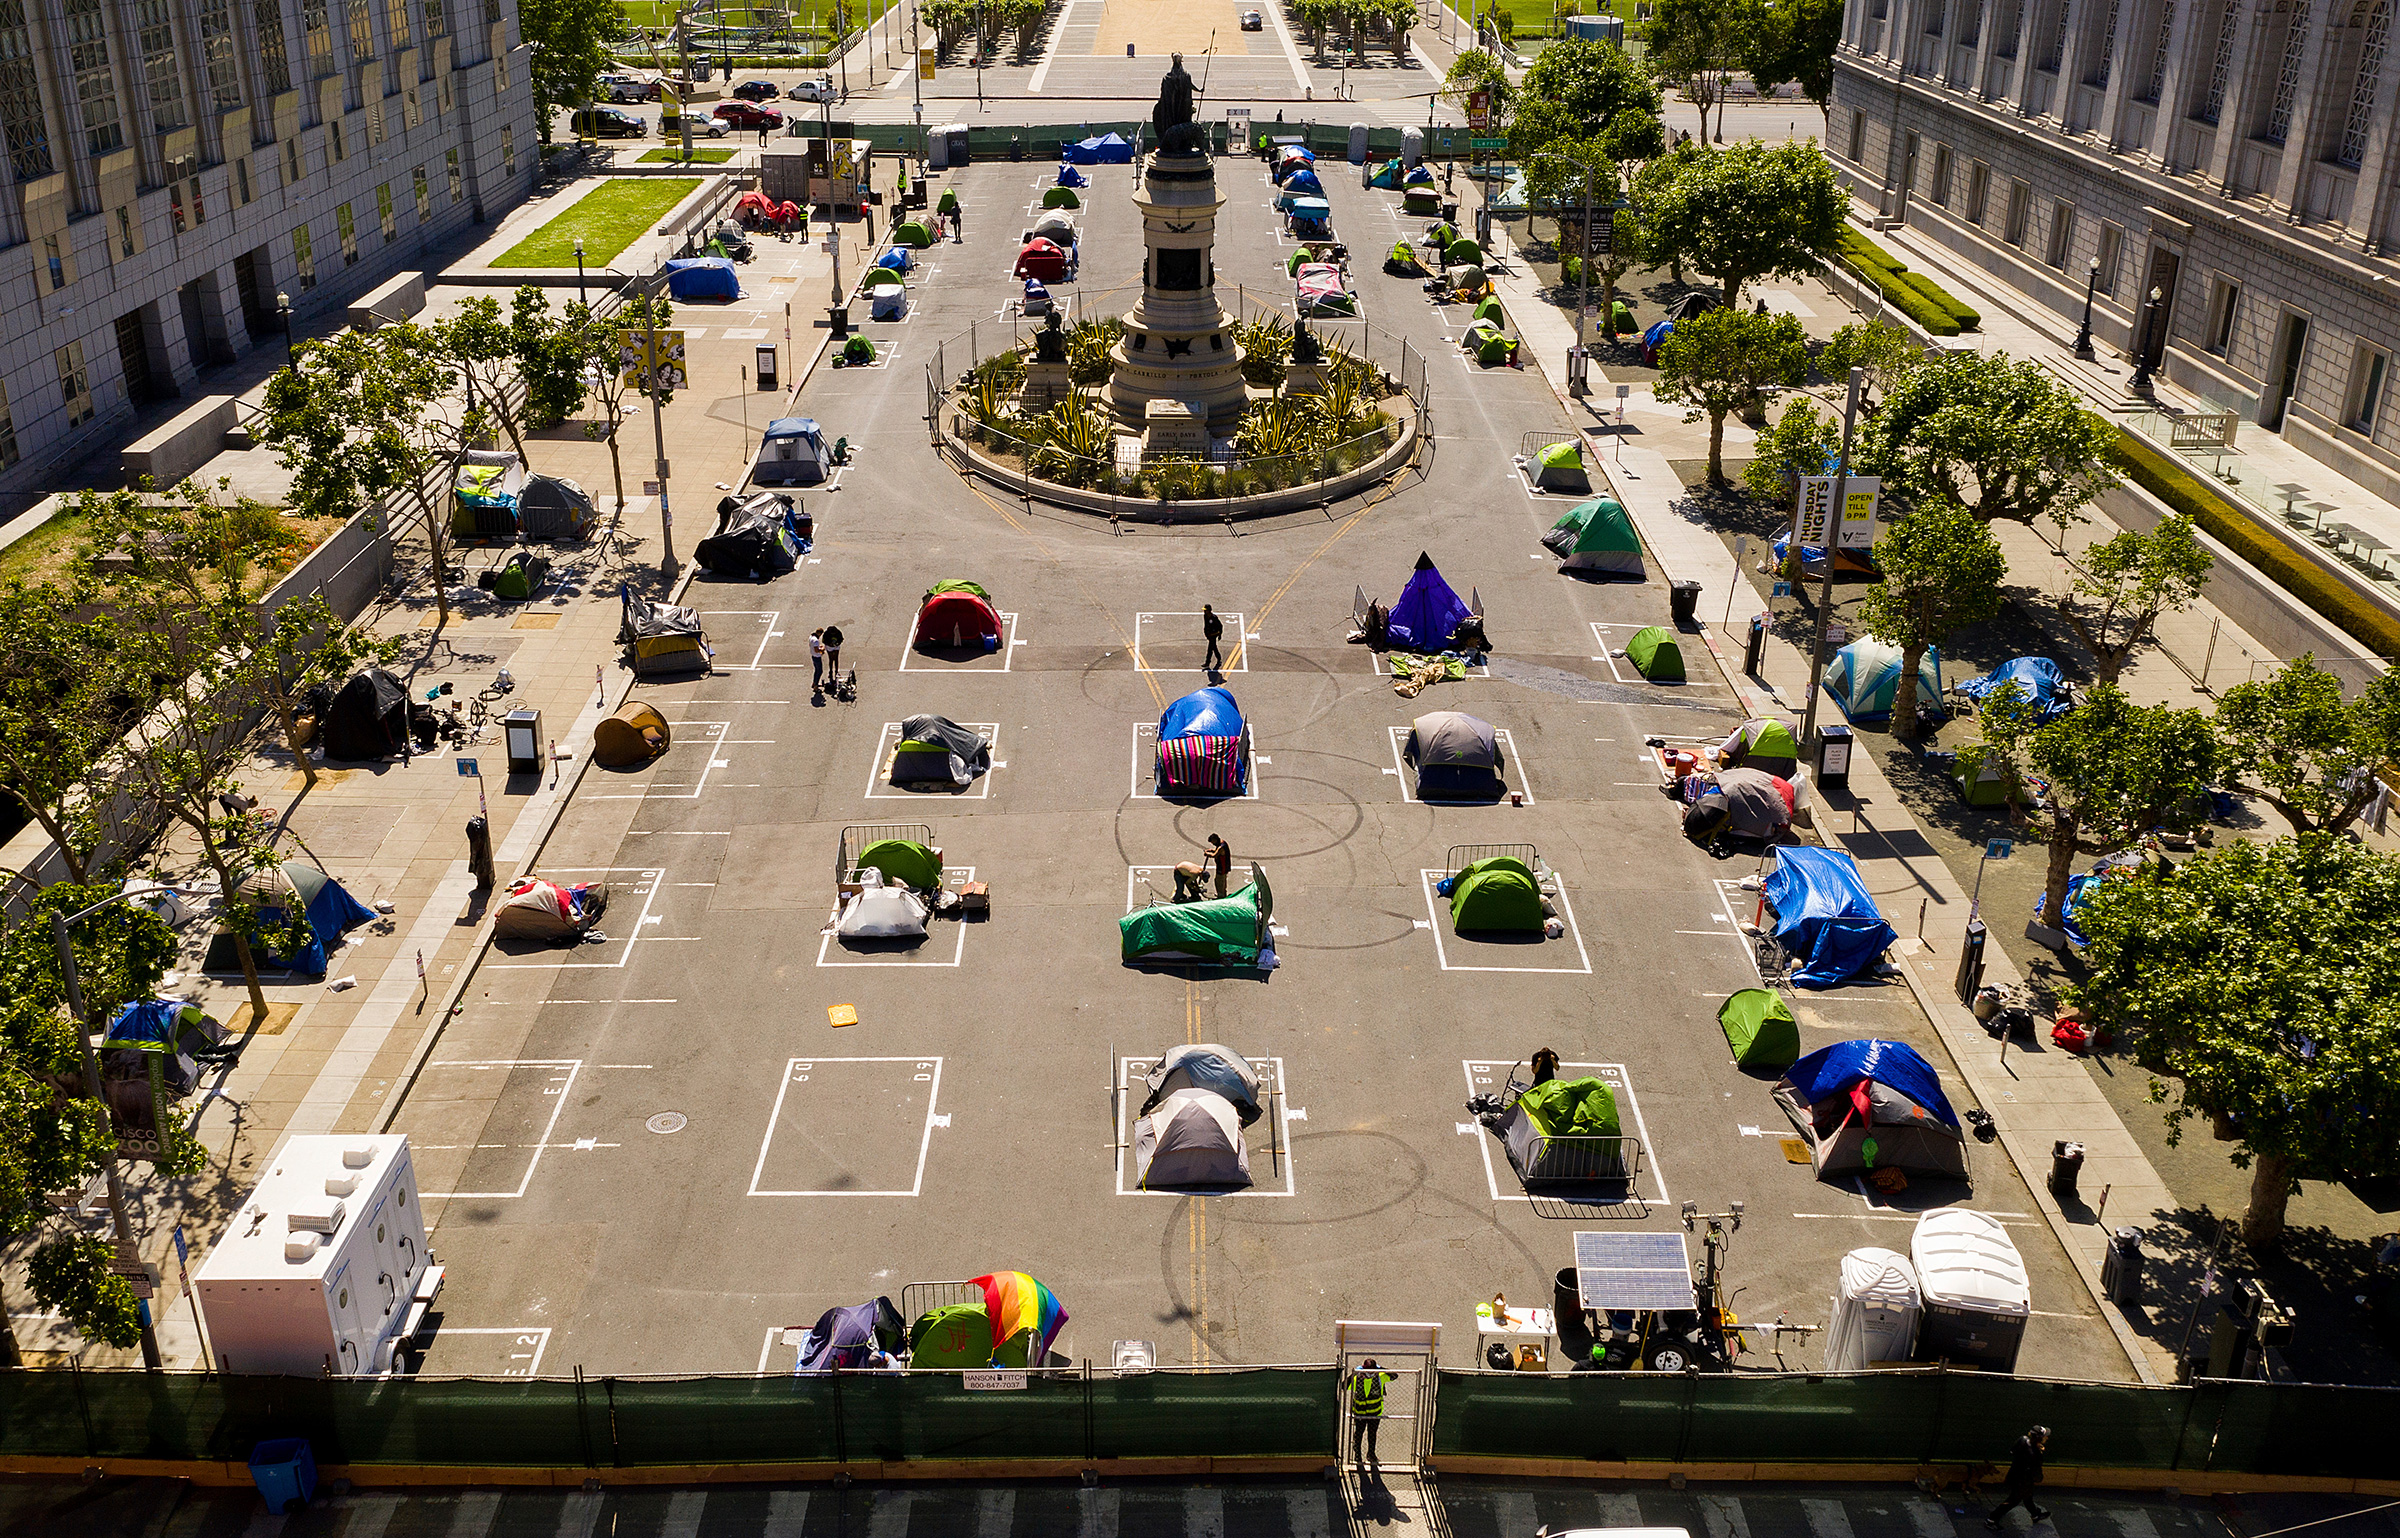 Rectangles designed to help prevent the spread of the coronavirus by encouraging social distancing line a city-sanctioned homeless encampment at San Francisco's Civic Center on May 21